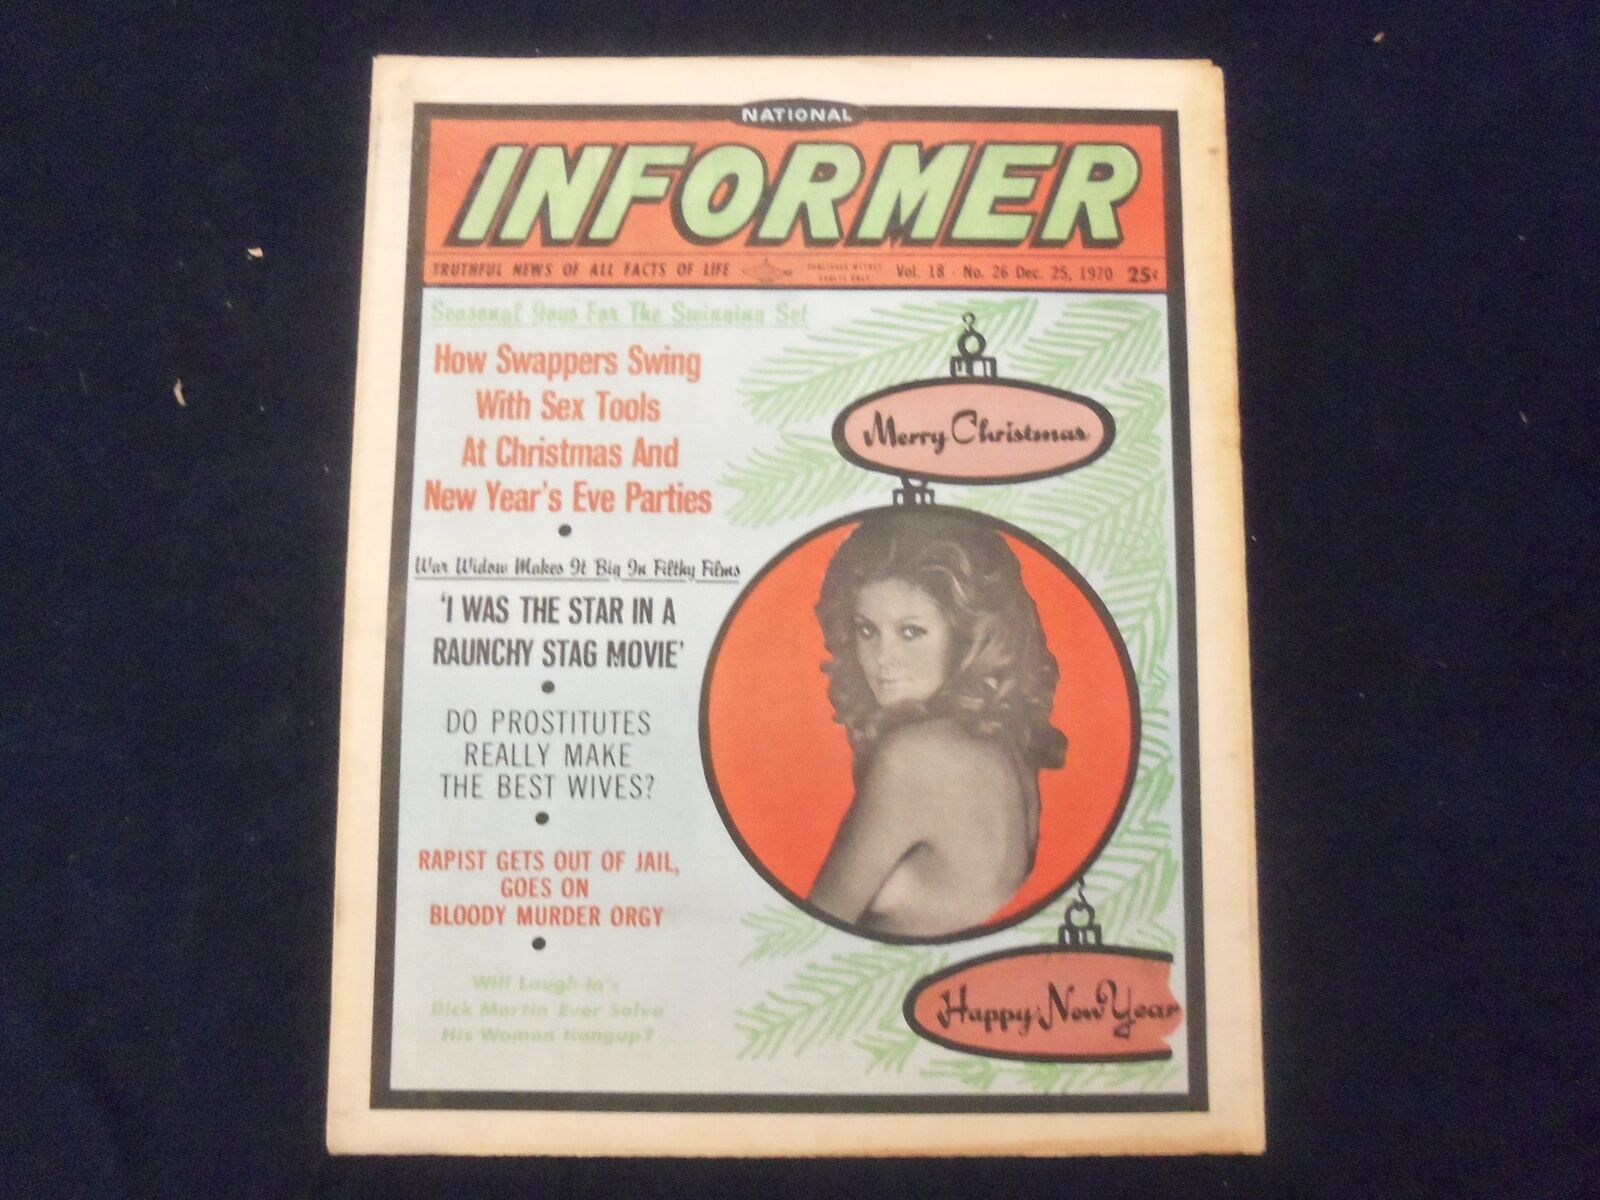 1970 DEC 25 NATIONAL INFORMER NEWSPAPER -MERRY CHRISTMAS-HAPPY NEW YEAR- NP 7309